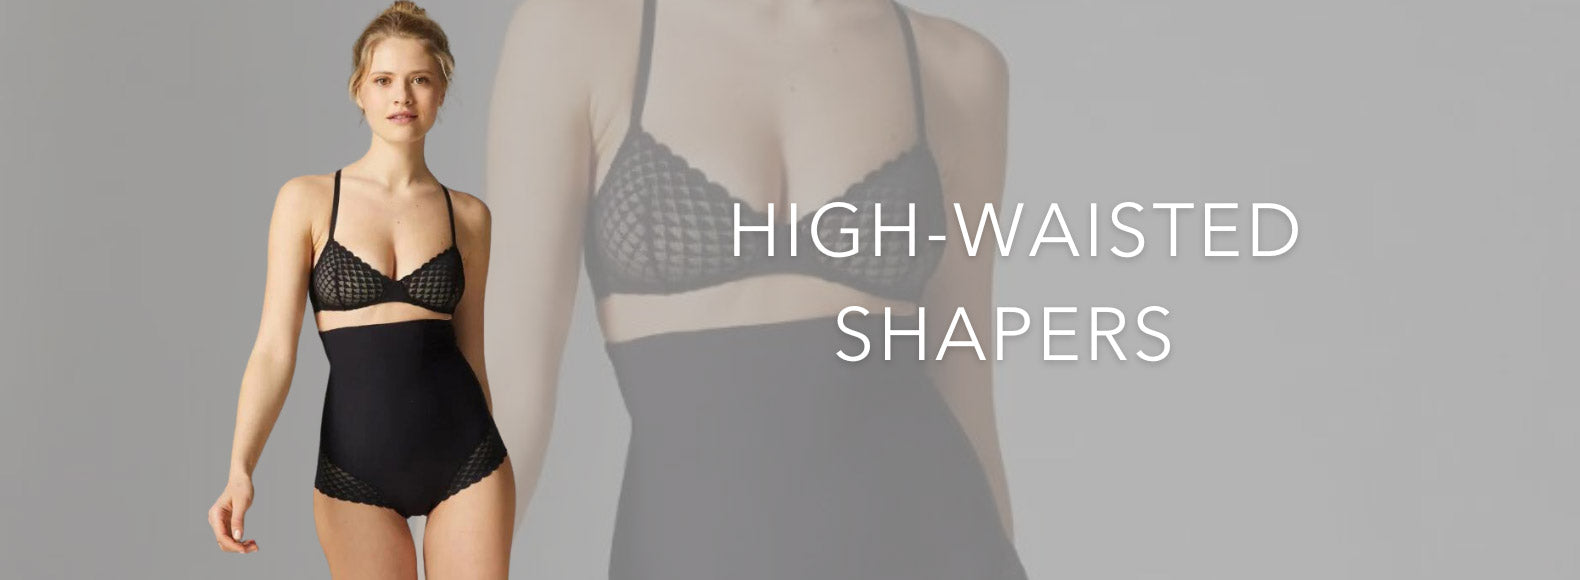 High-Waisted Shapers Collections